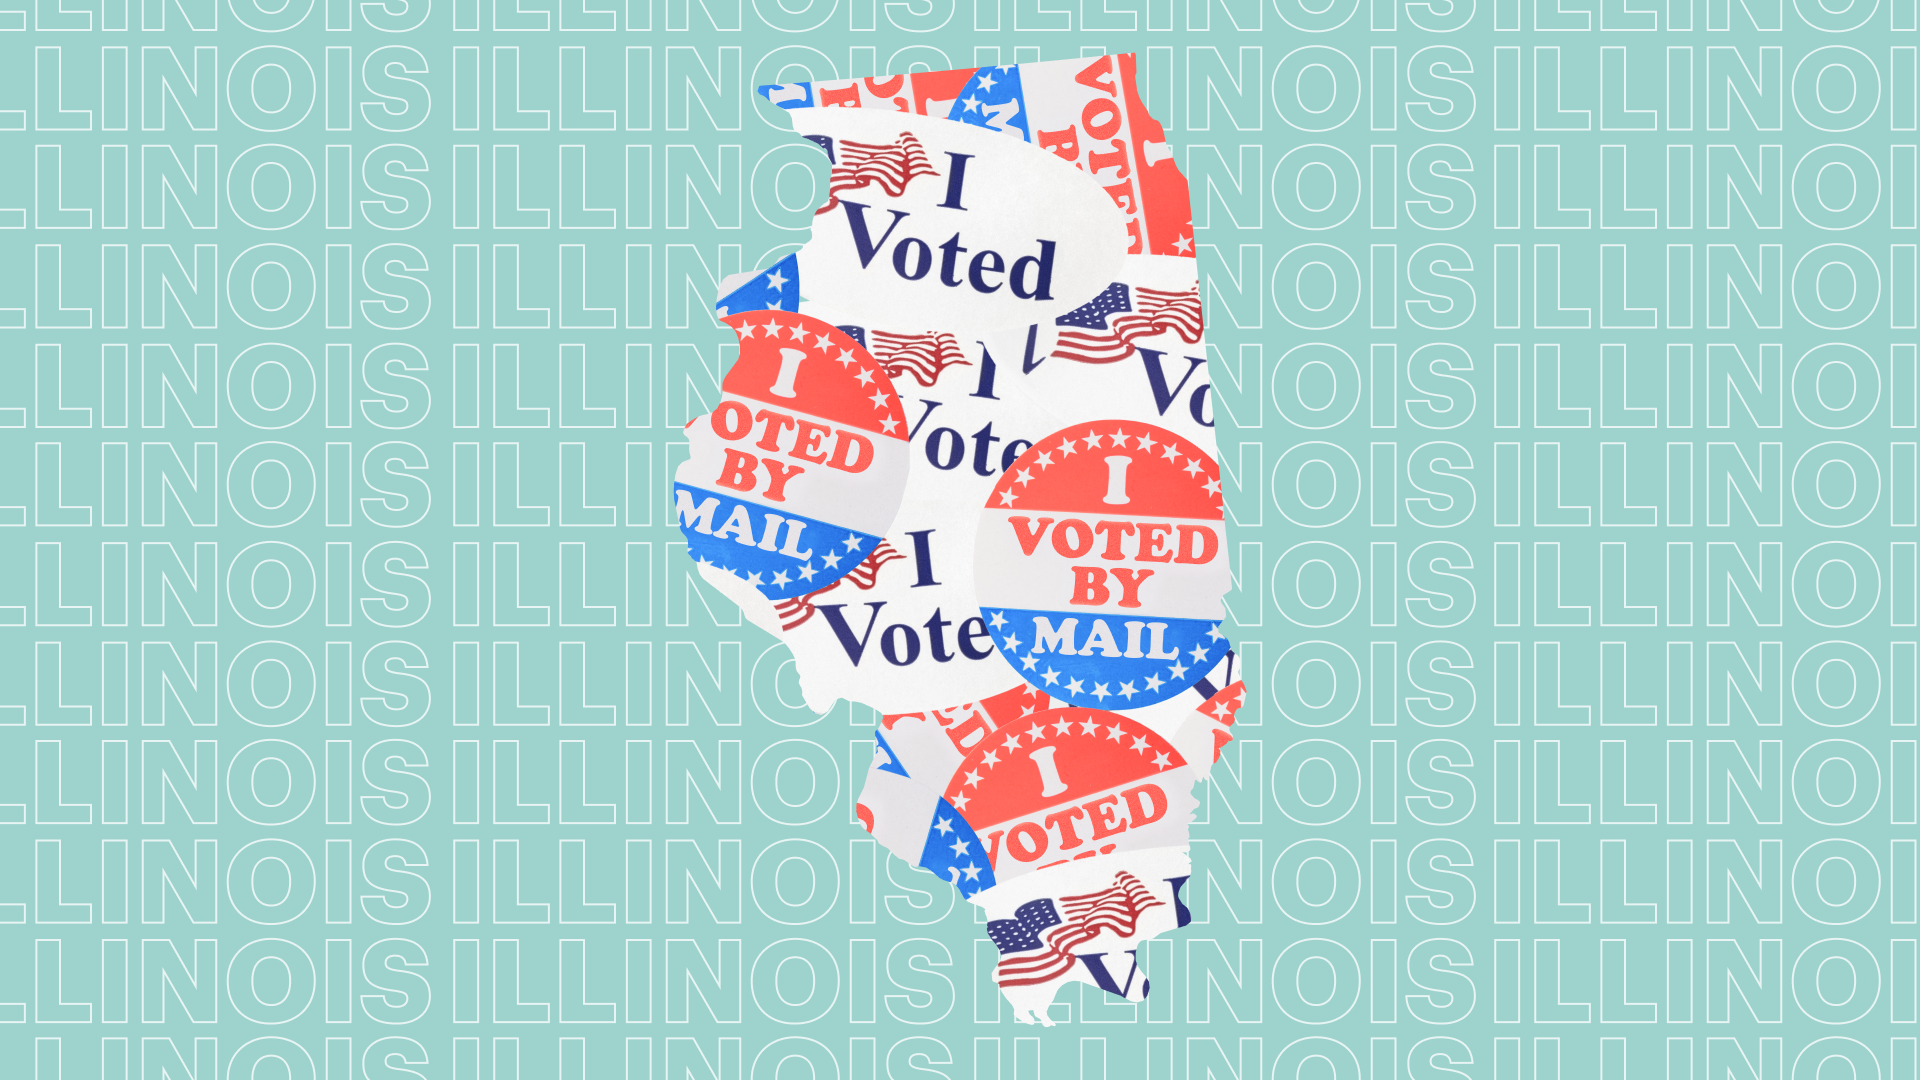 Illinois state with I voted images over it